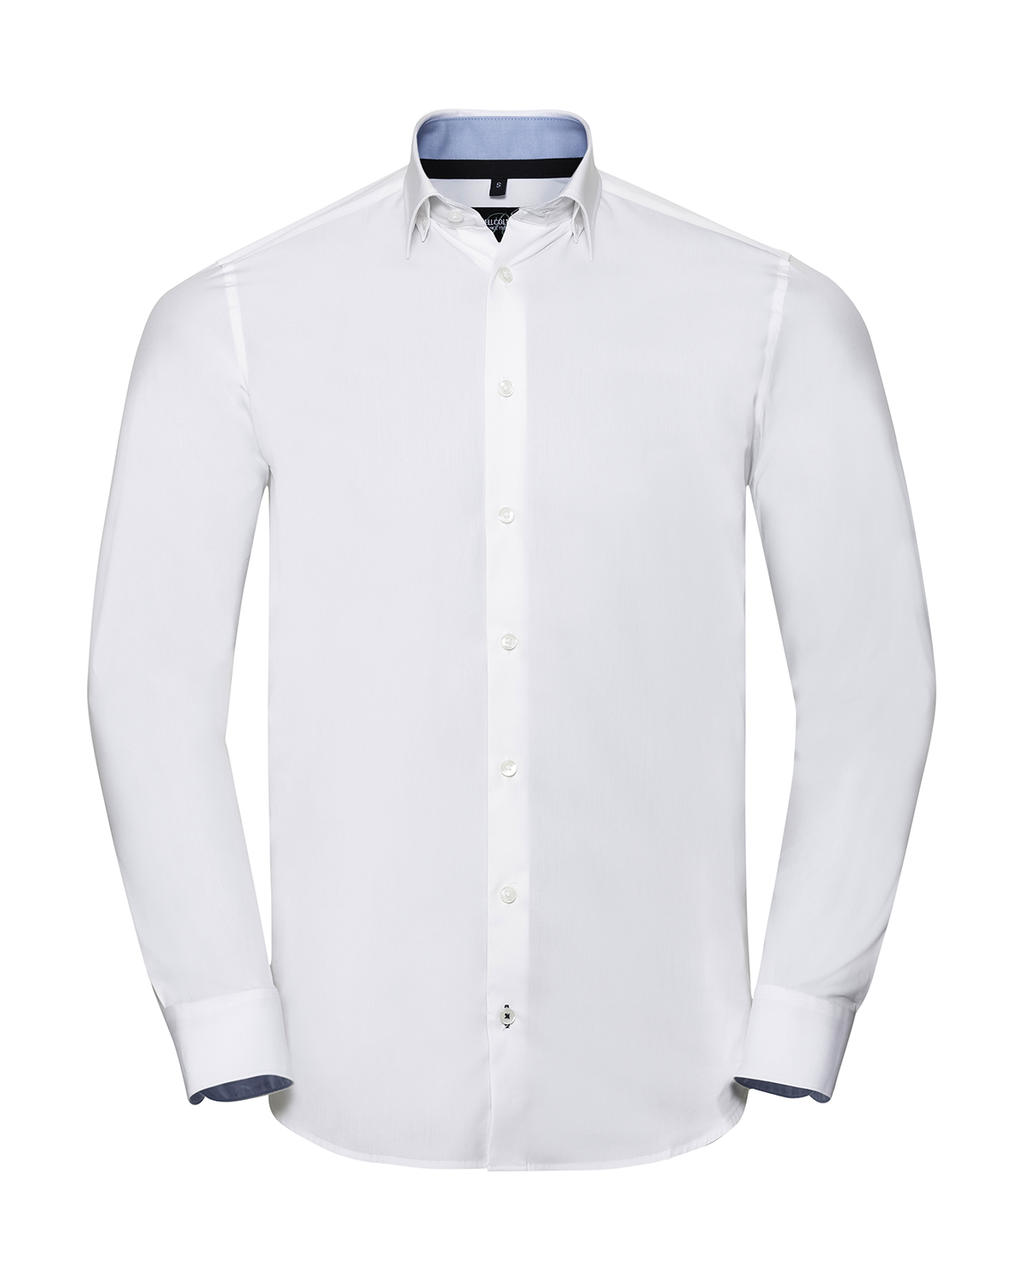  Mens LS Tailored Contrast Ultimate Stretch Shirt in Farbe White/Oxford Blue/Bright Navy